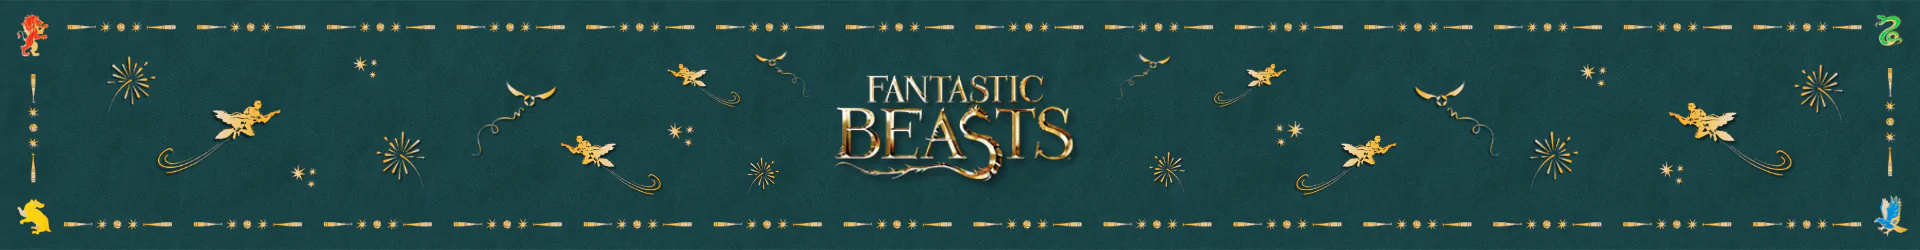 Fantastic Beasts and Where to Find Them coin banks banner